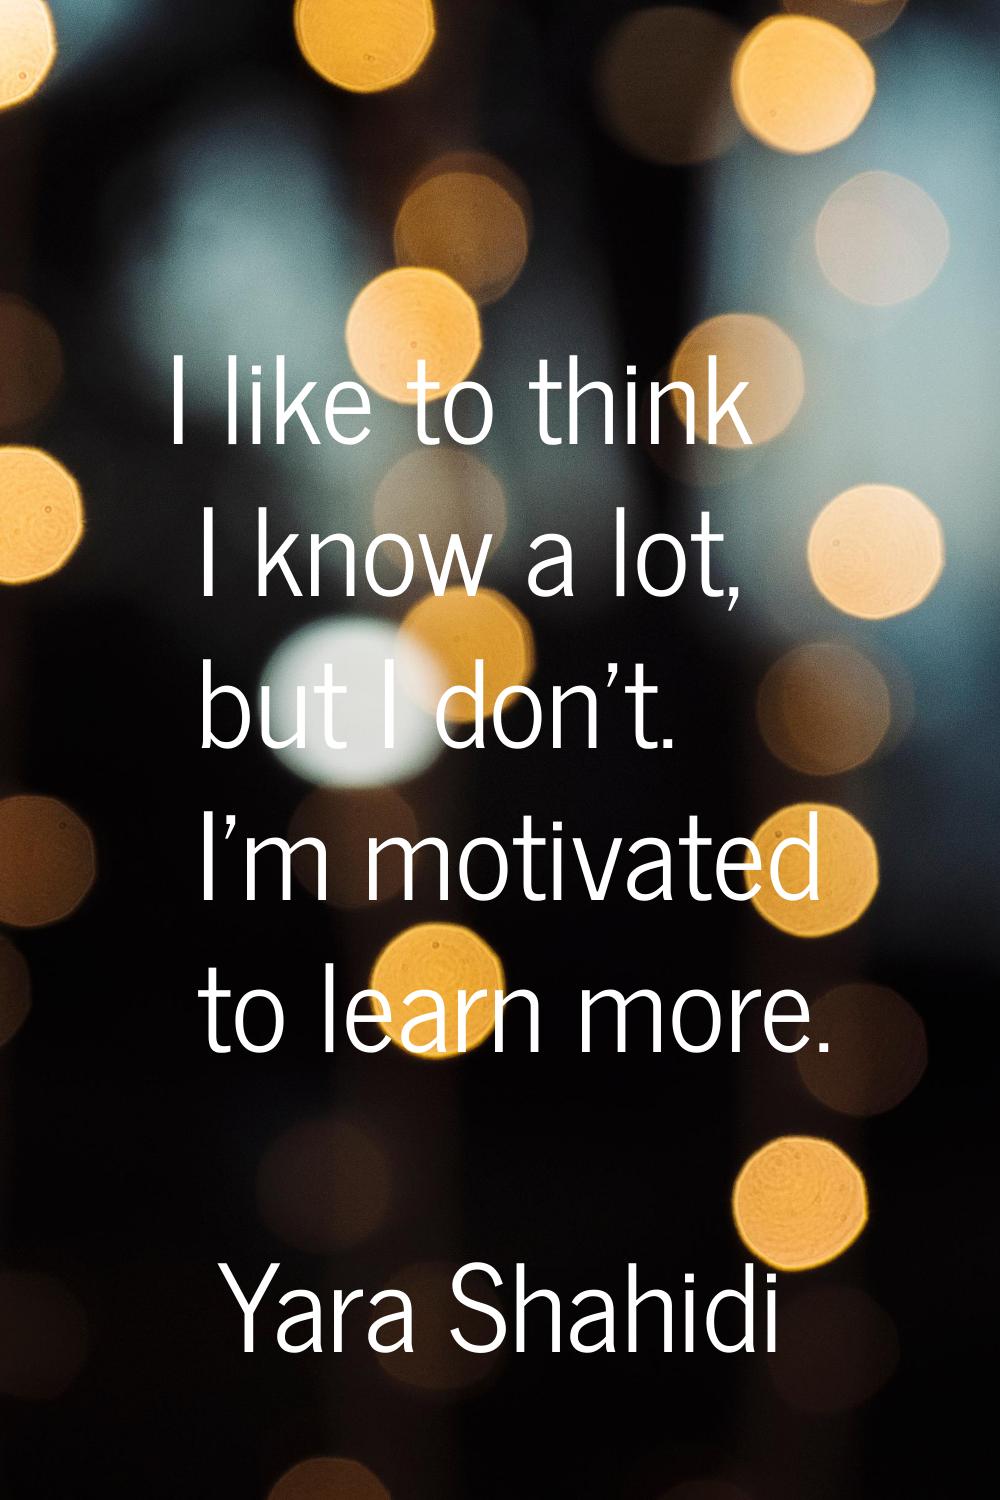 I like to think I know a lot, but I don't. I'm motivated to learn more.